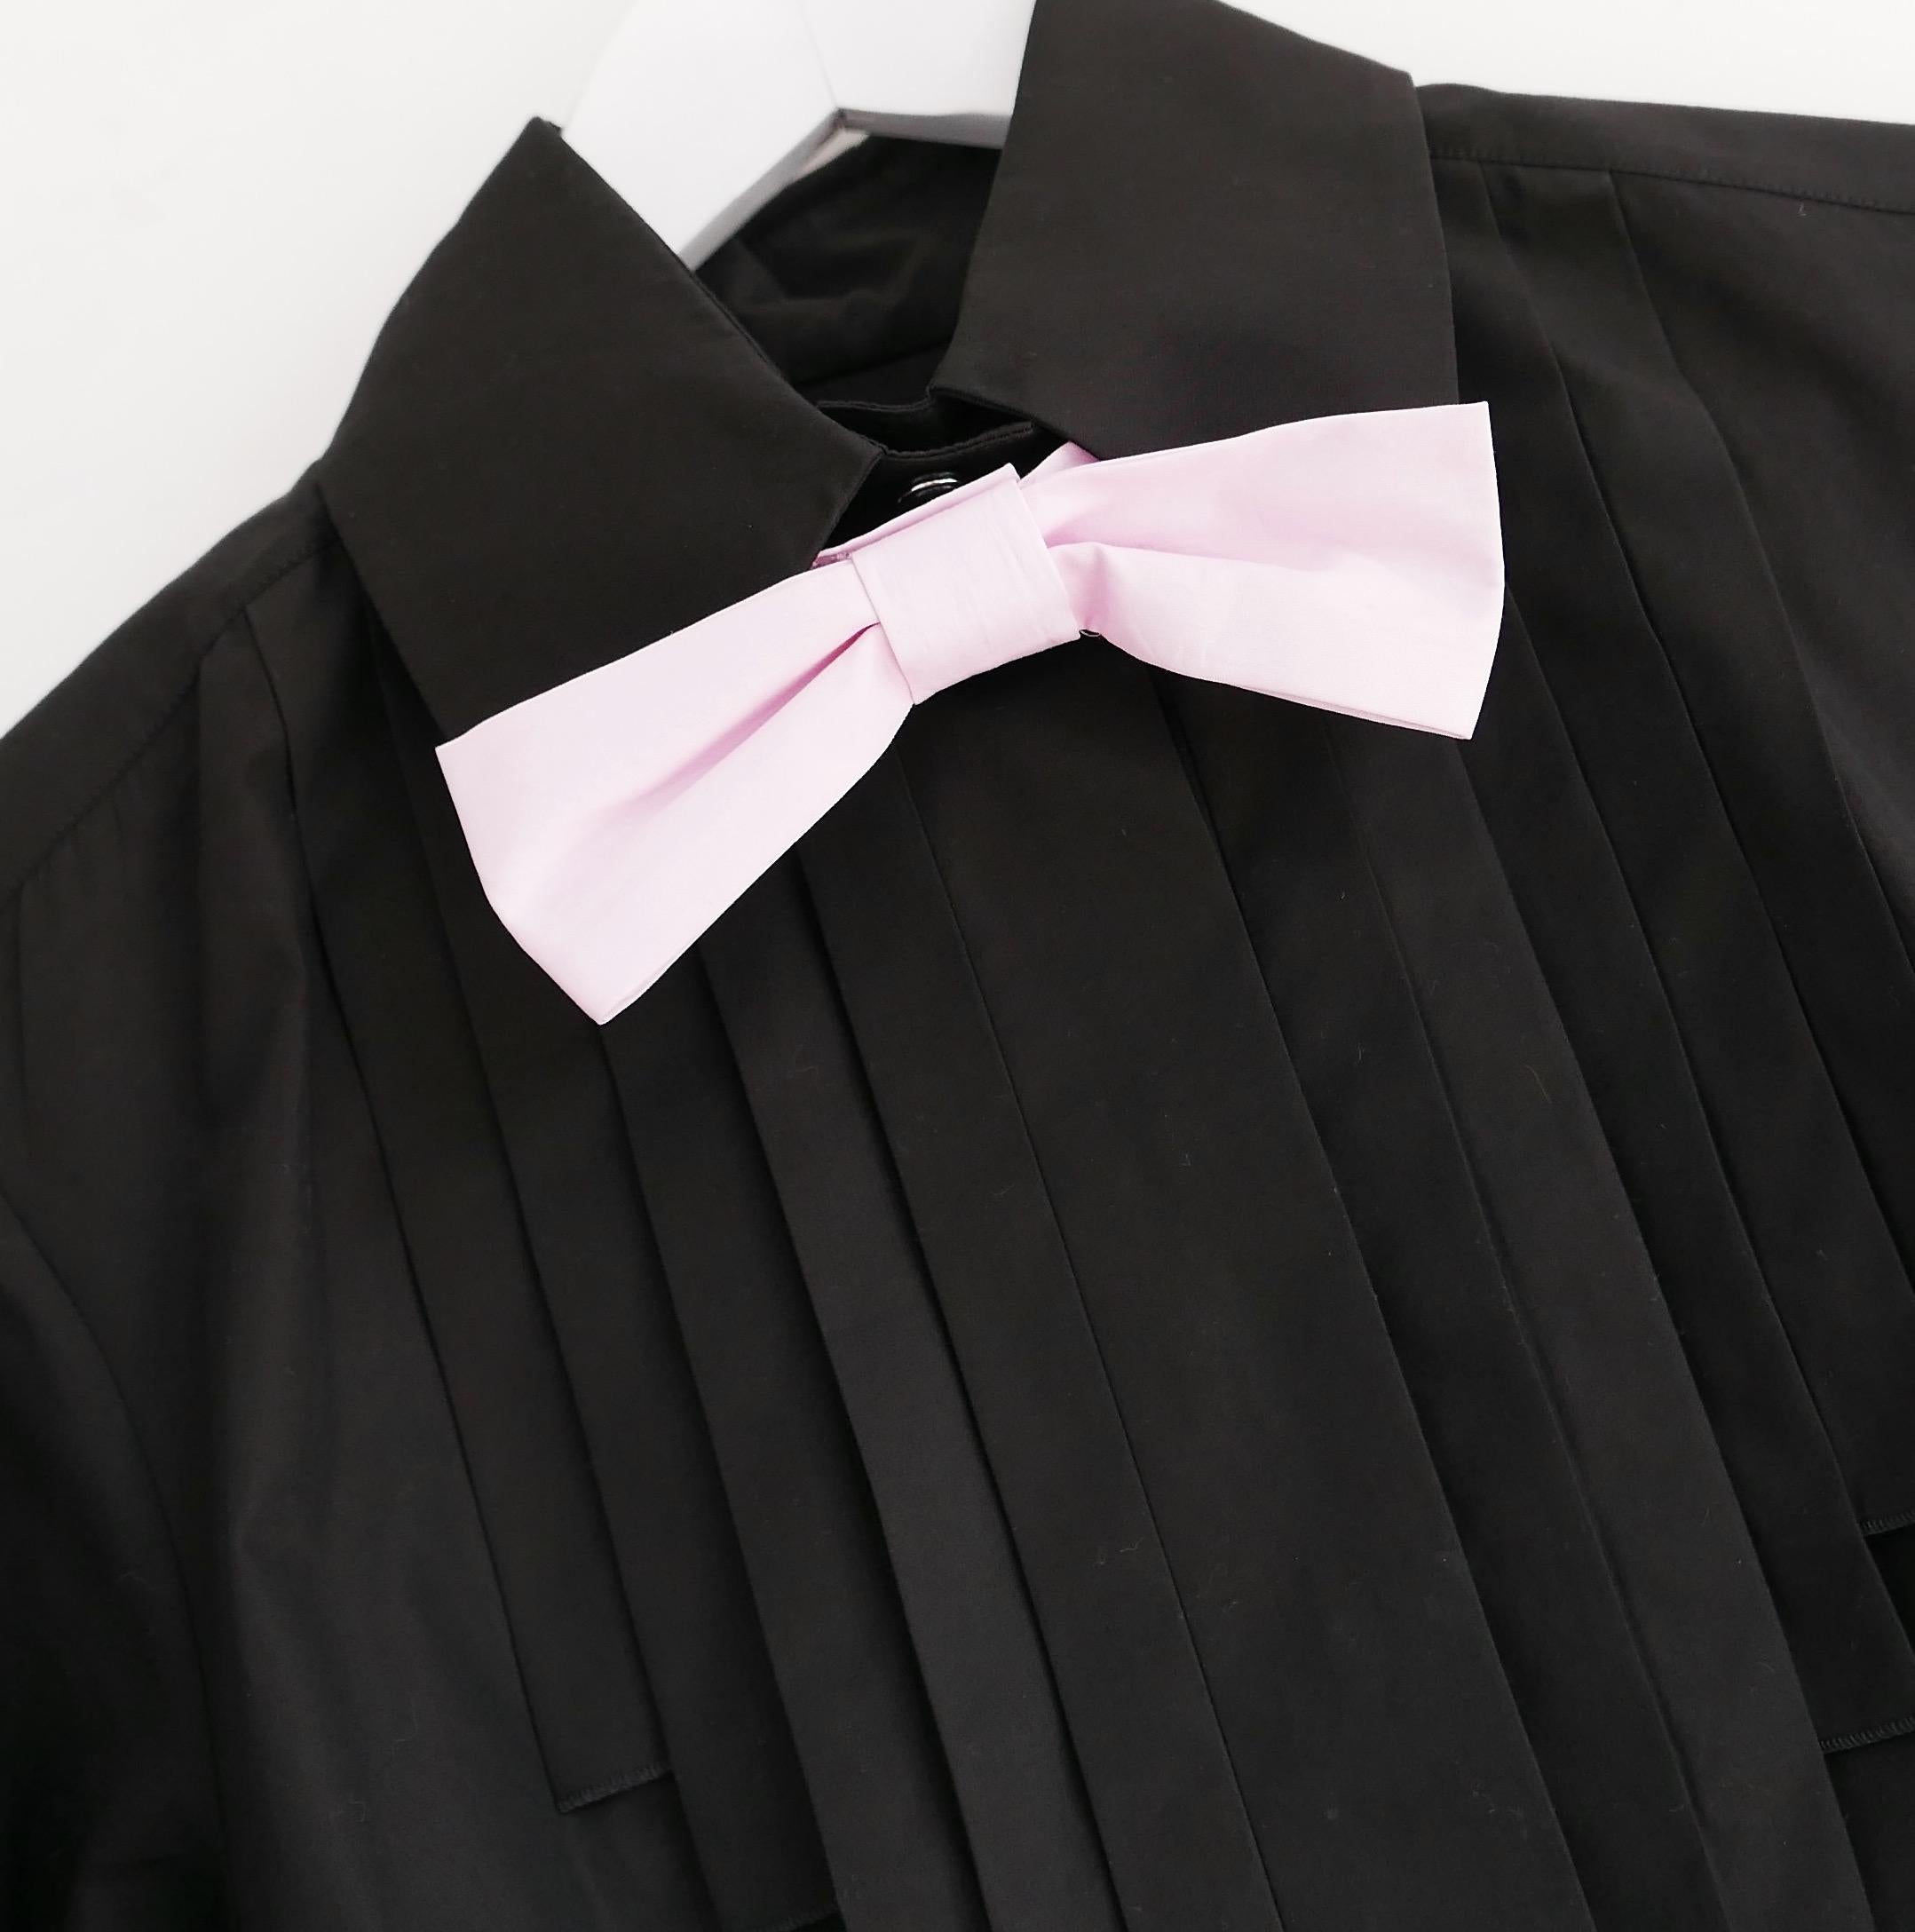 Absolutely stunning vintage Chanel blouse from the Fall 2007 Collection. Worn once and has been newly dry cleaned. Made from crisp black cotton with removable candy pink bow tie, it has sharply stitched Art Deco inspired panelling, black resin